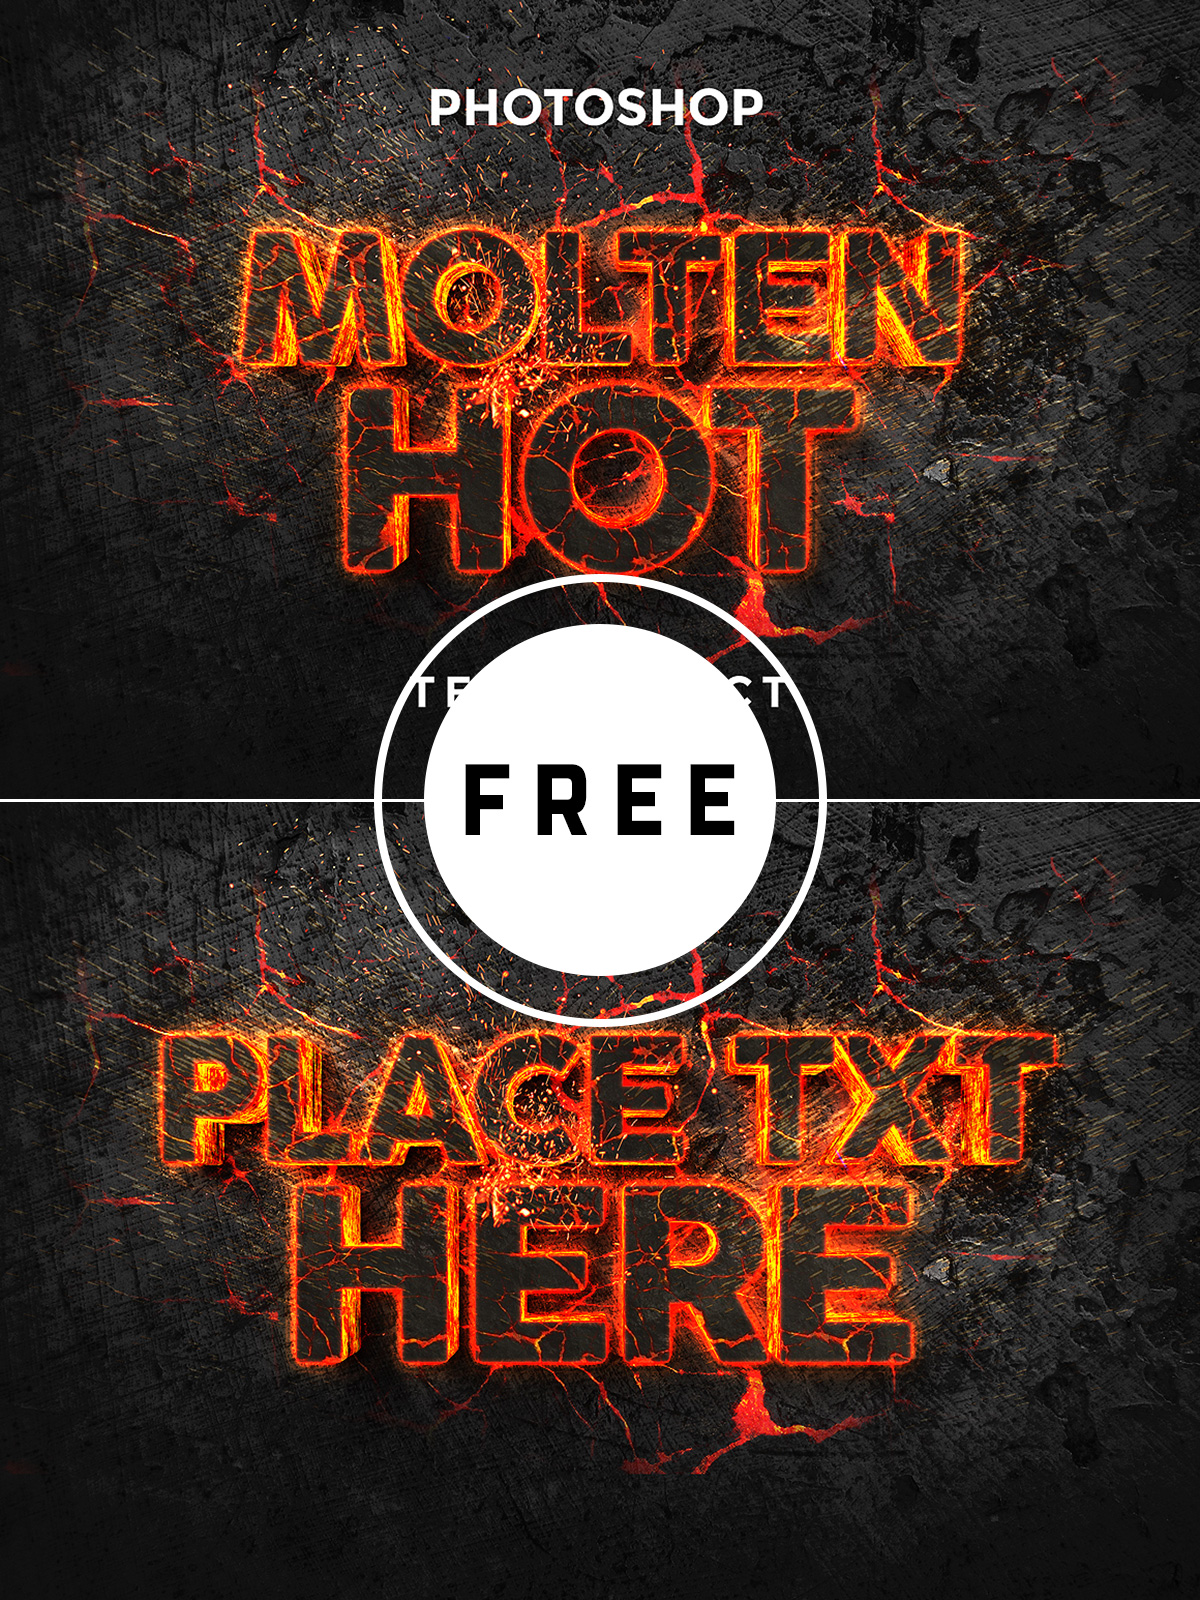 80 Free Smart Easy PSD Text Effects